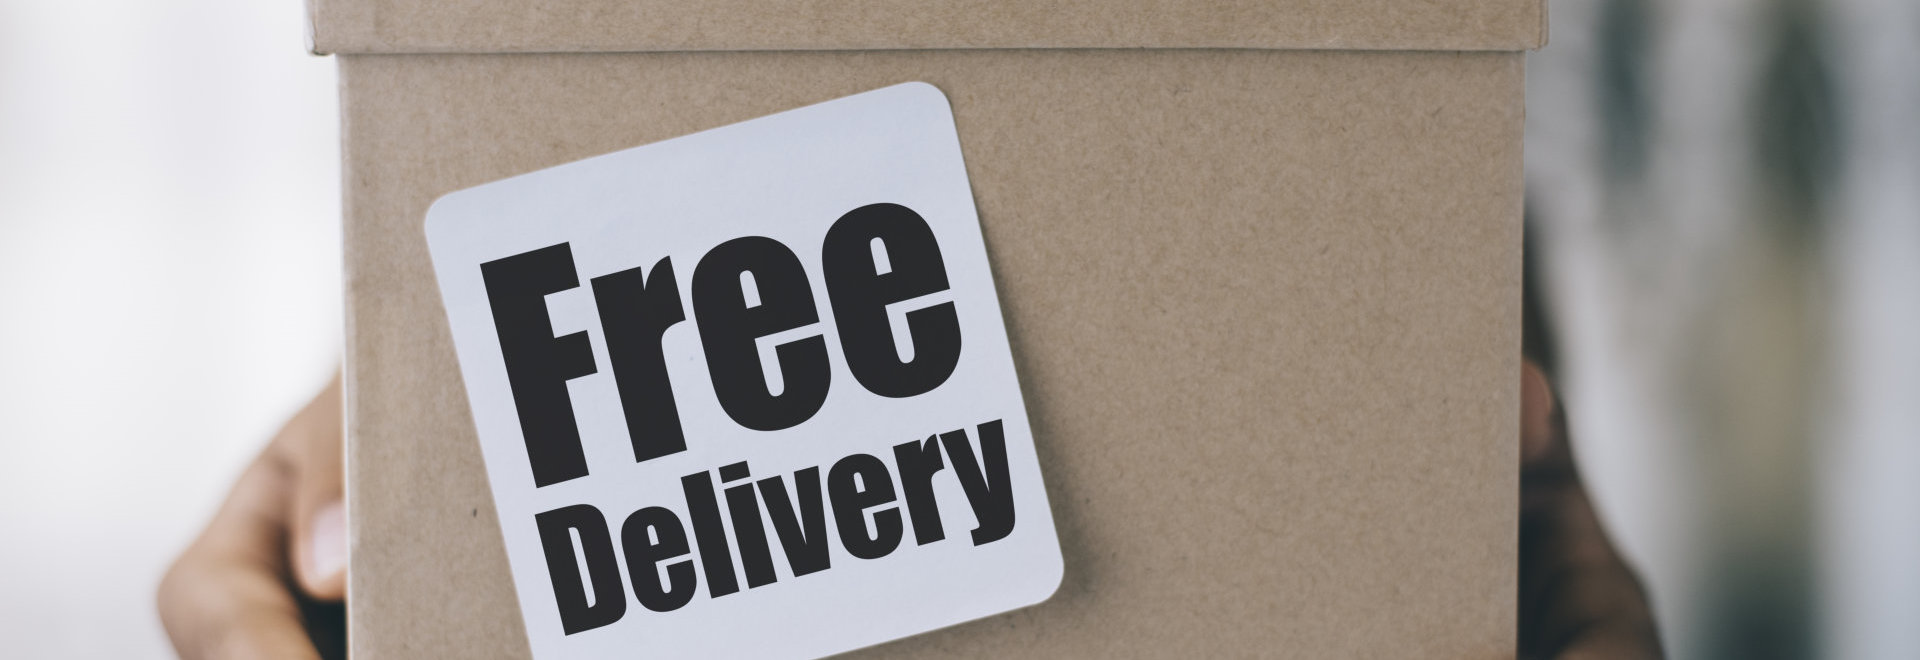 free delivery box